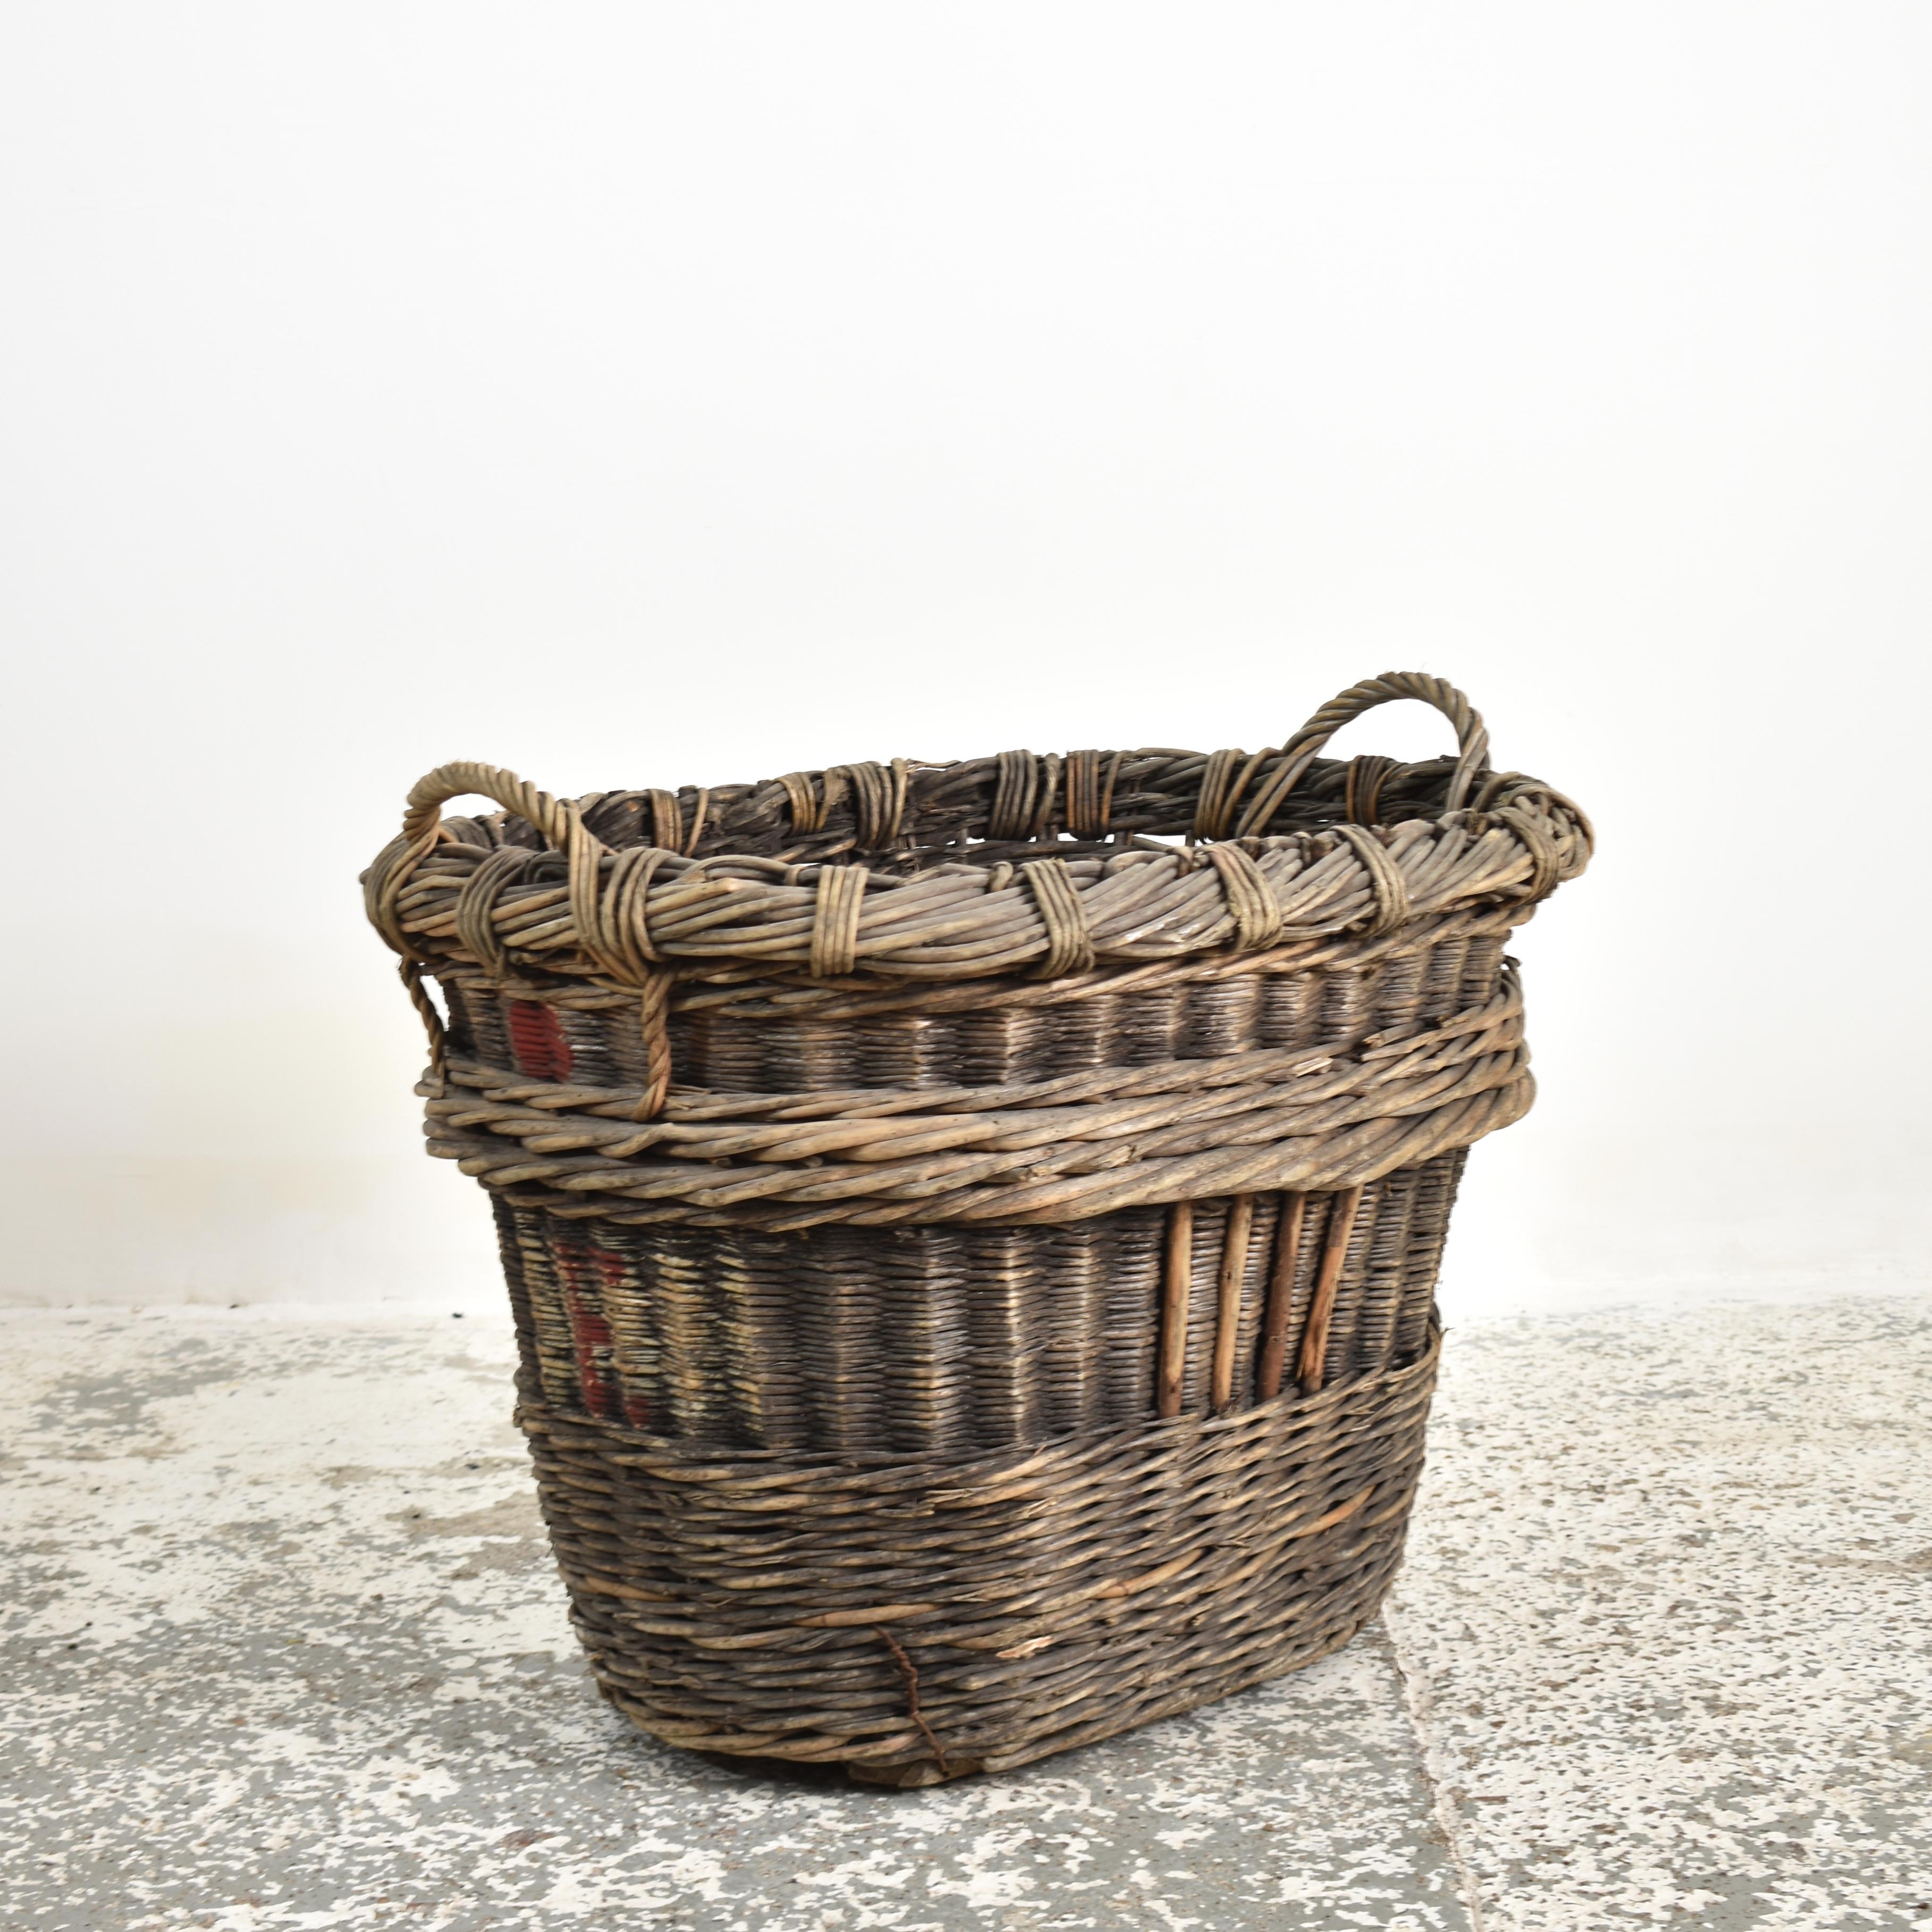 A beautiful hand-made wicker champagne basket from France used to harvest grapes in the champagne region of Reims. The markings on the end identify the grower and vineyard it belonged to. The basket has reinforced sides with chestnut splints and a